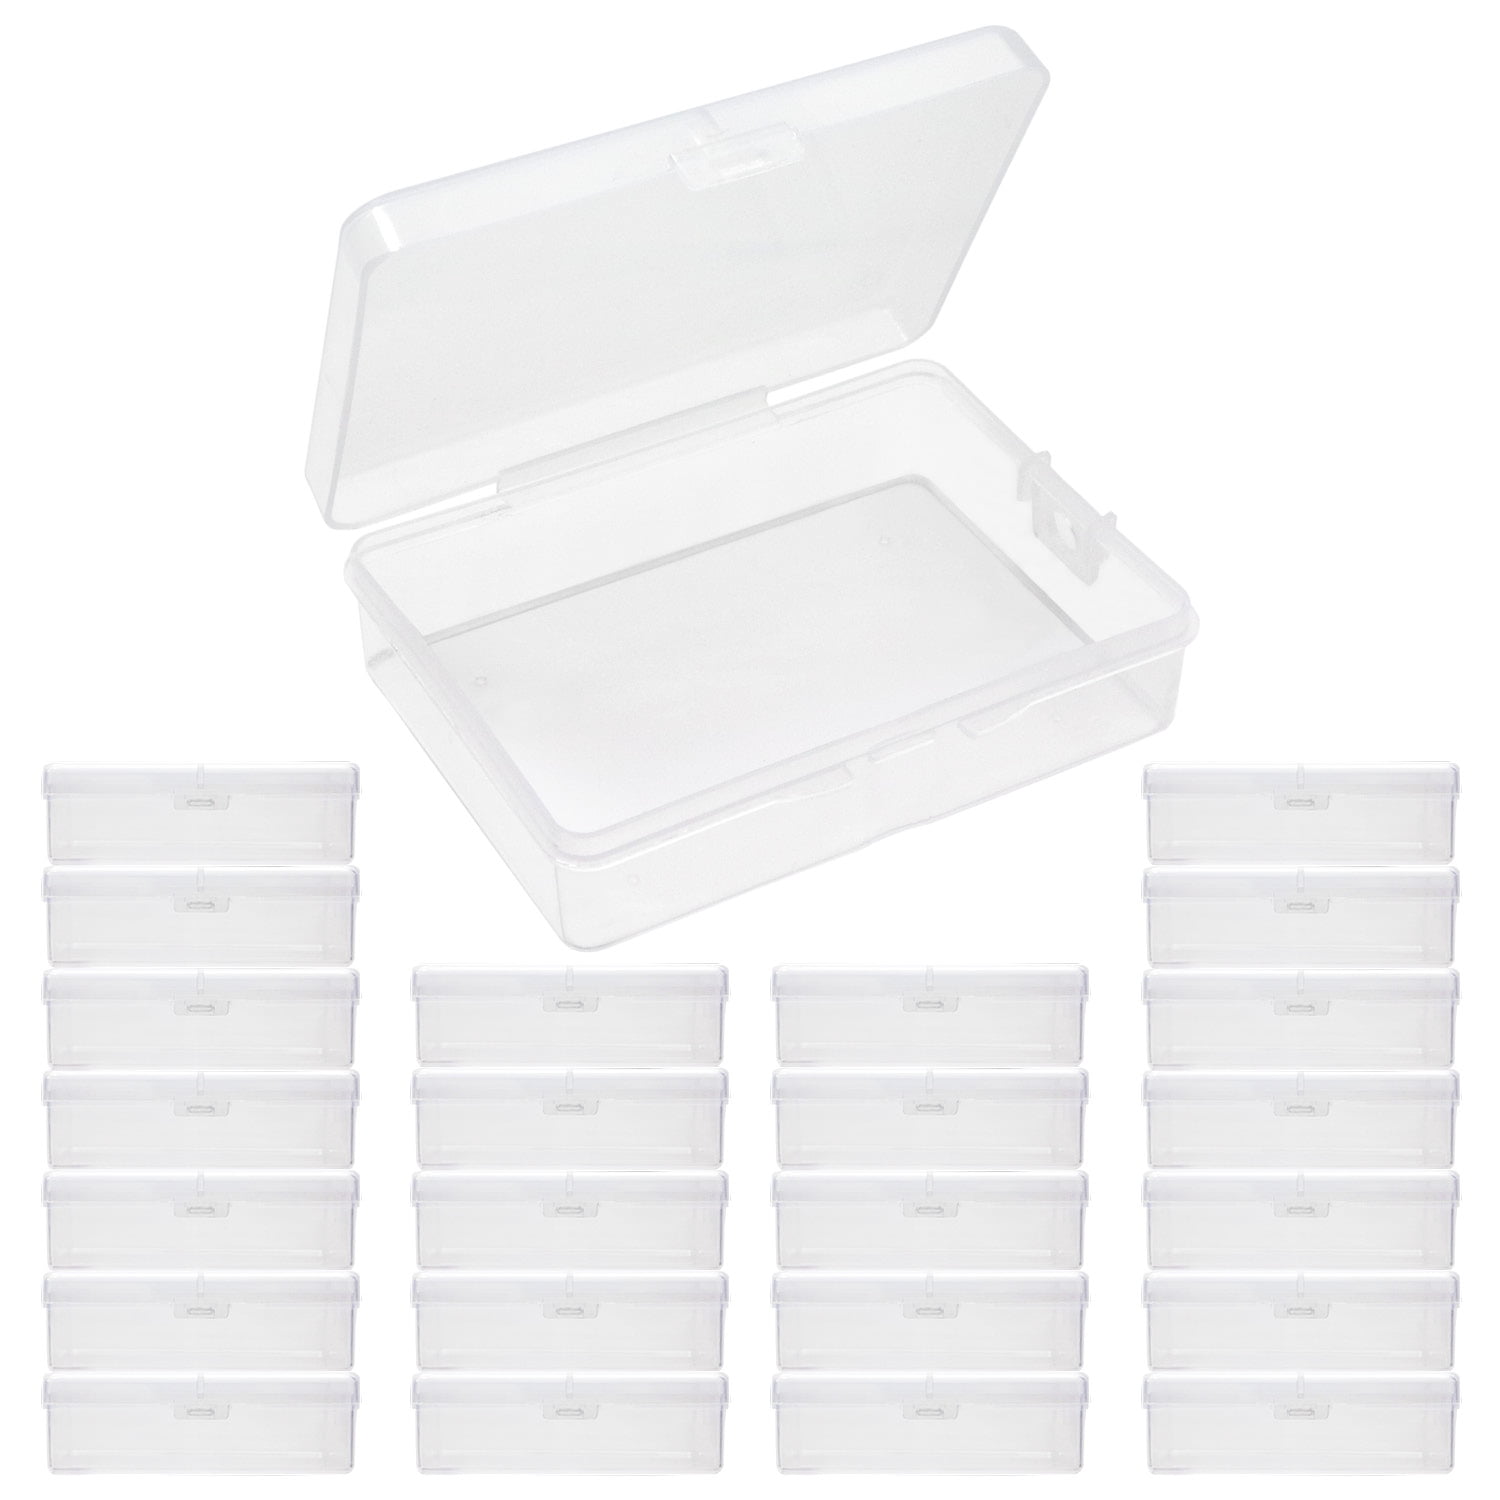 ISKYBOB 6 Packs Small Plastic Storage Containers, Clear Rectangle